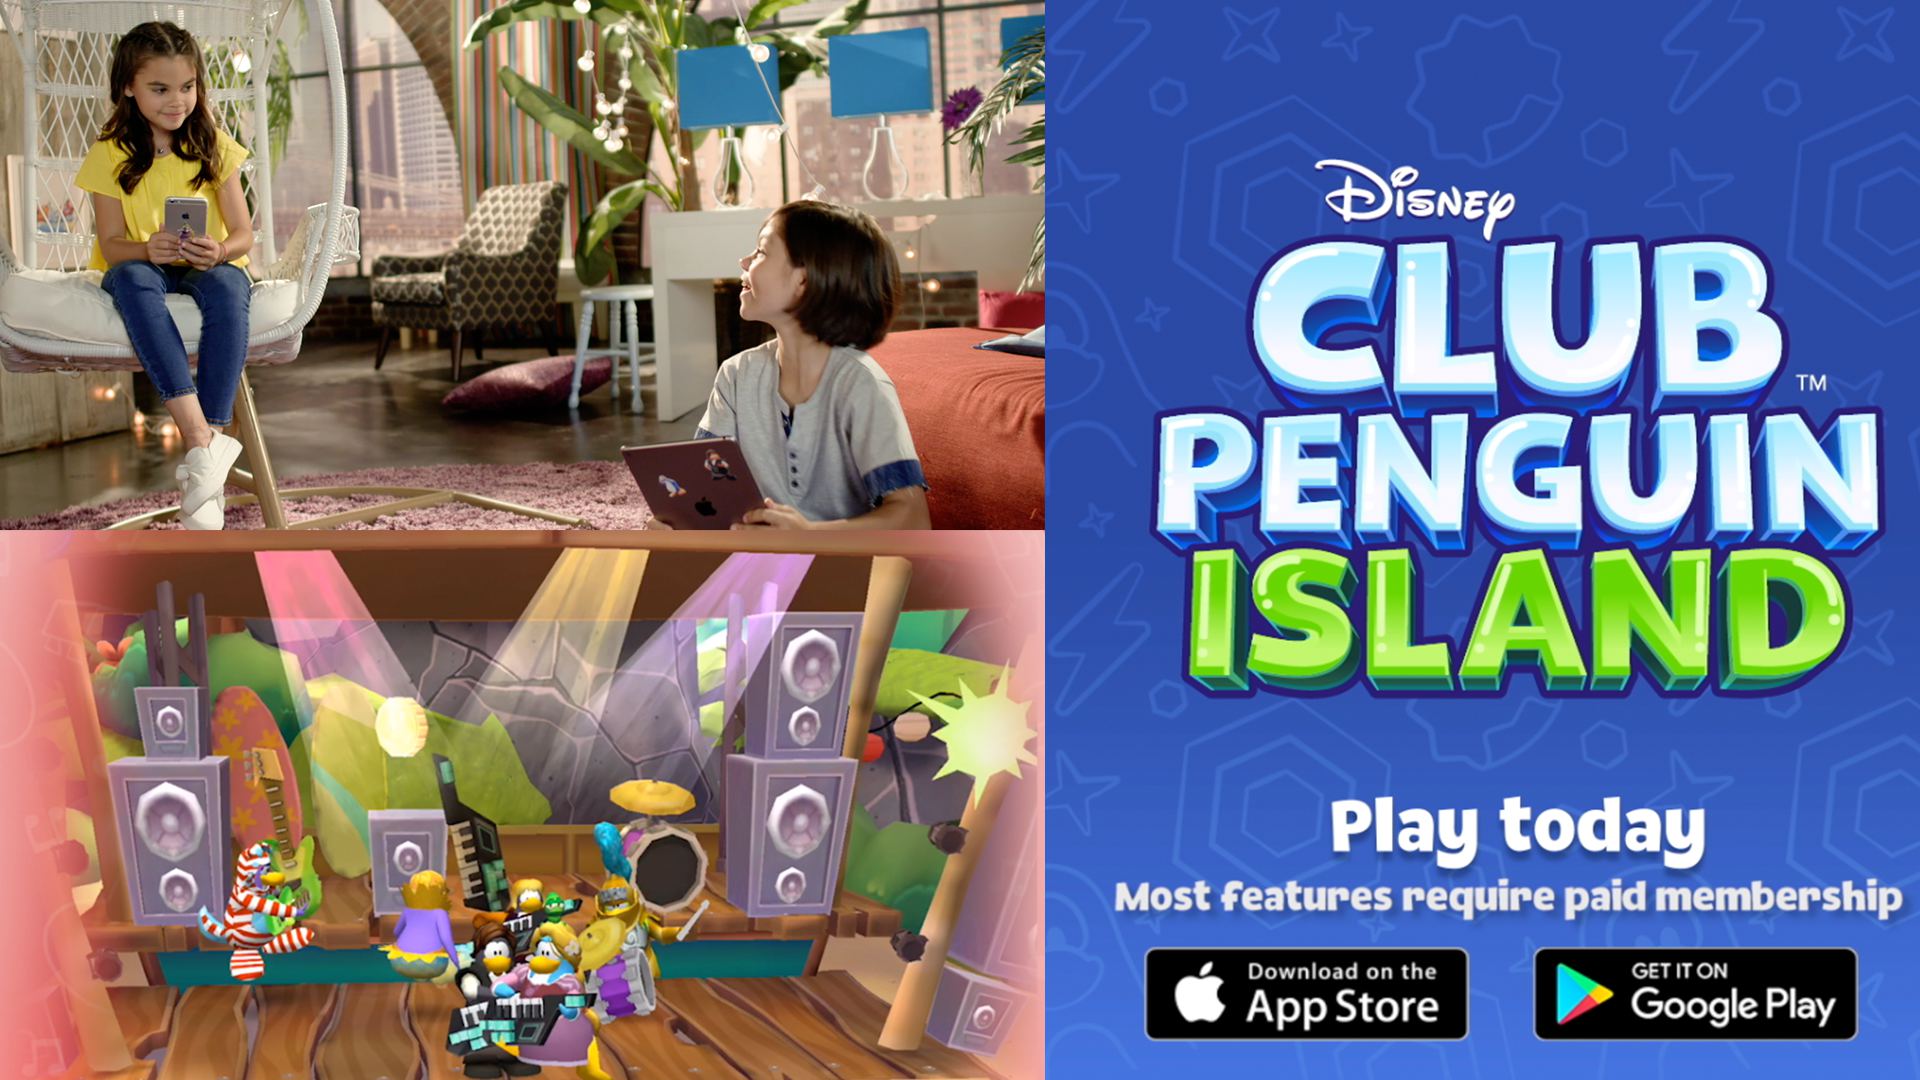 Club Penguin Island Launches for Mobile - The Toy Book